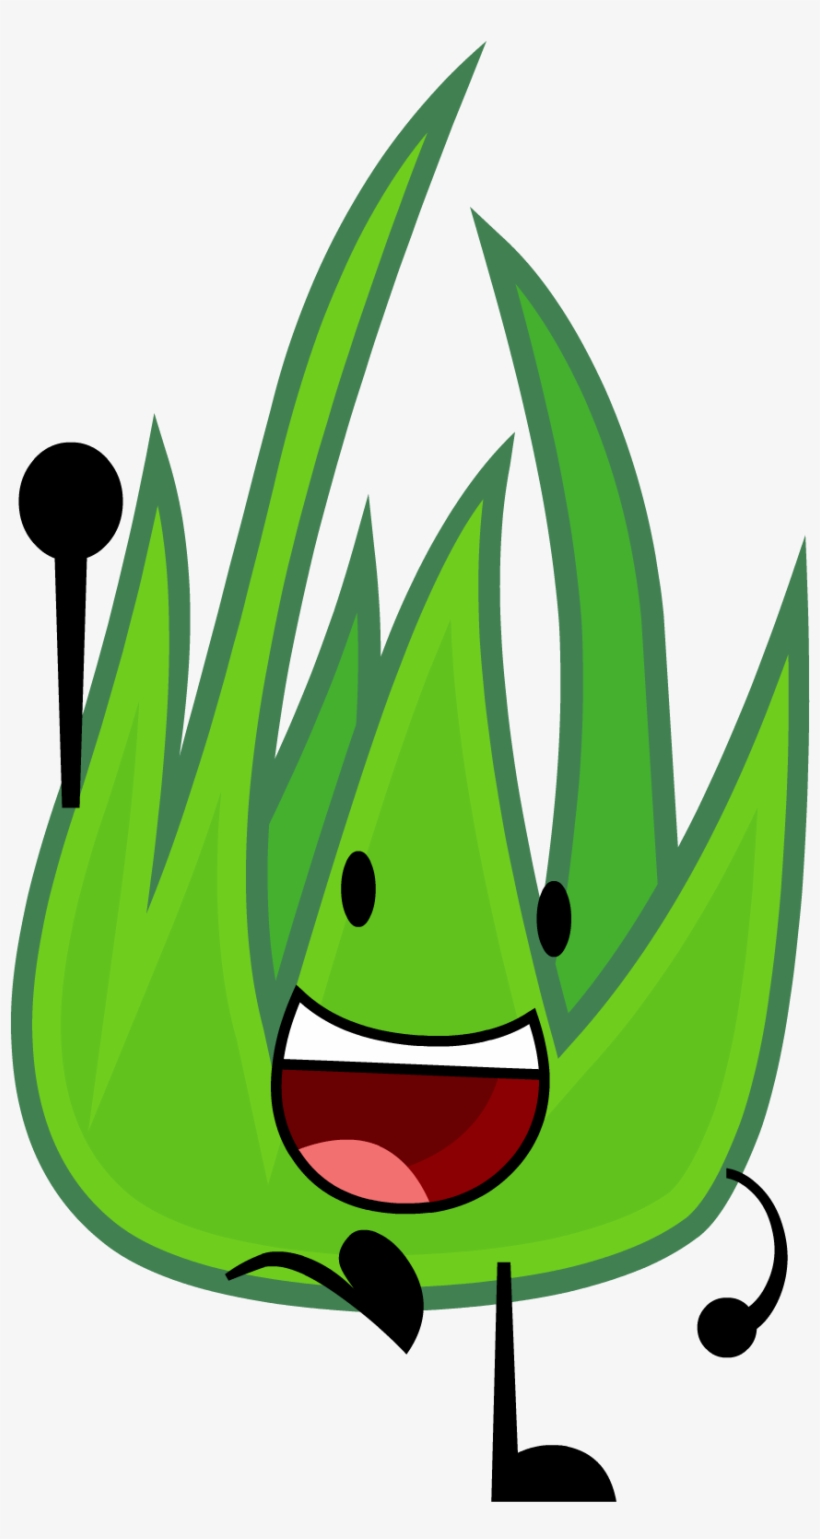 Grassy Bday - Grassy Bfdi Png, transparent png #2592412